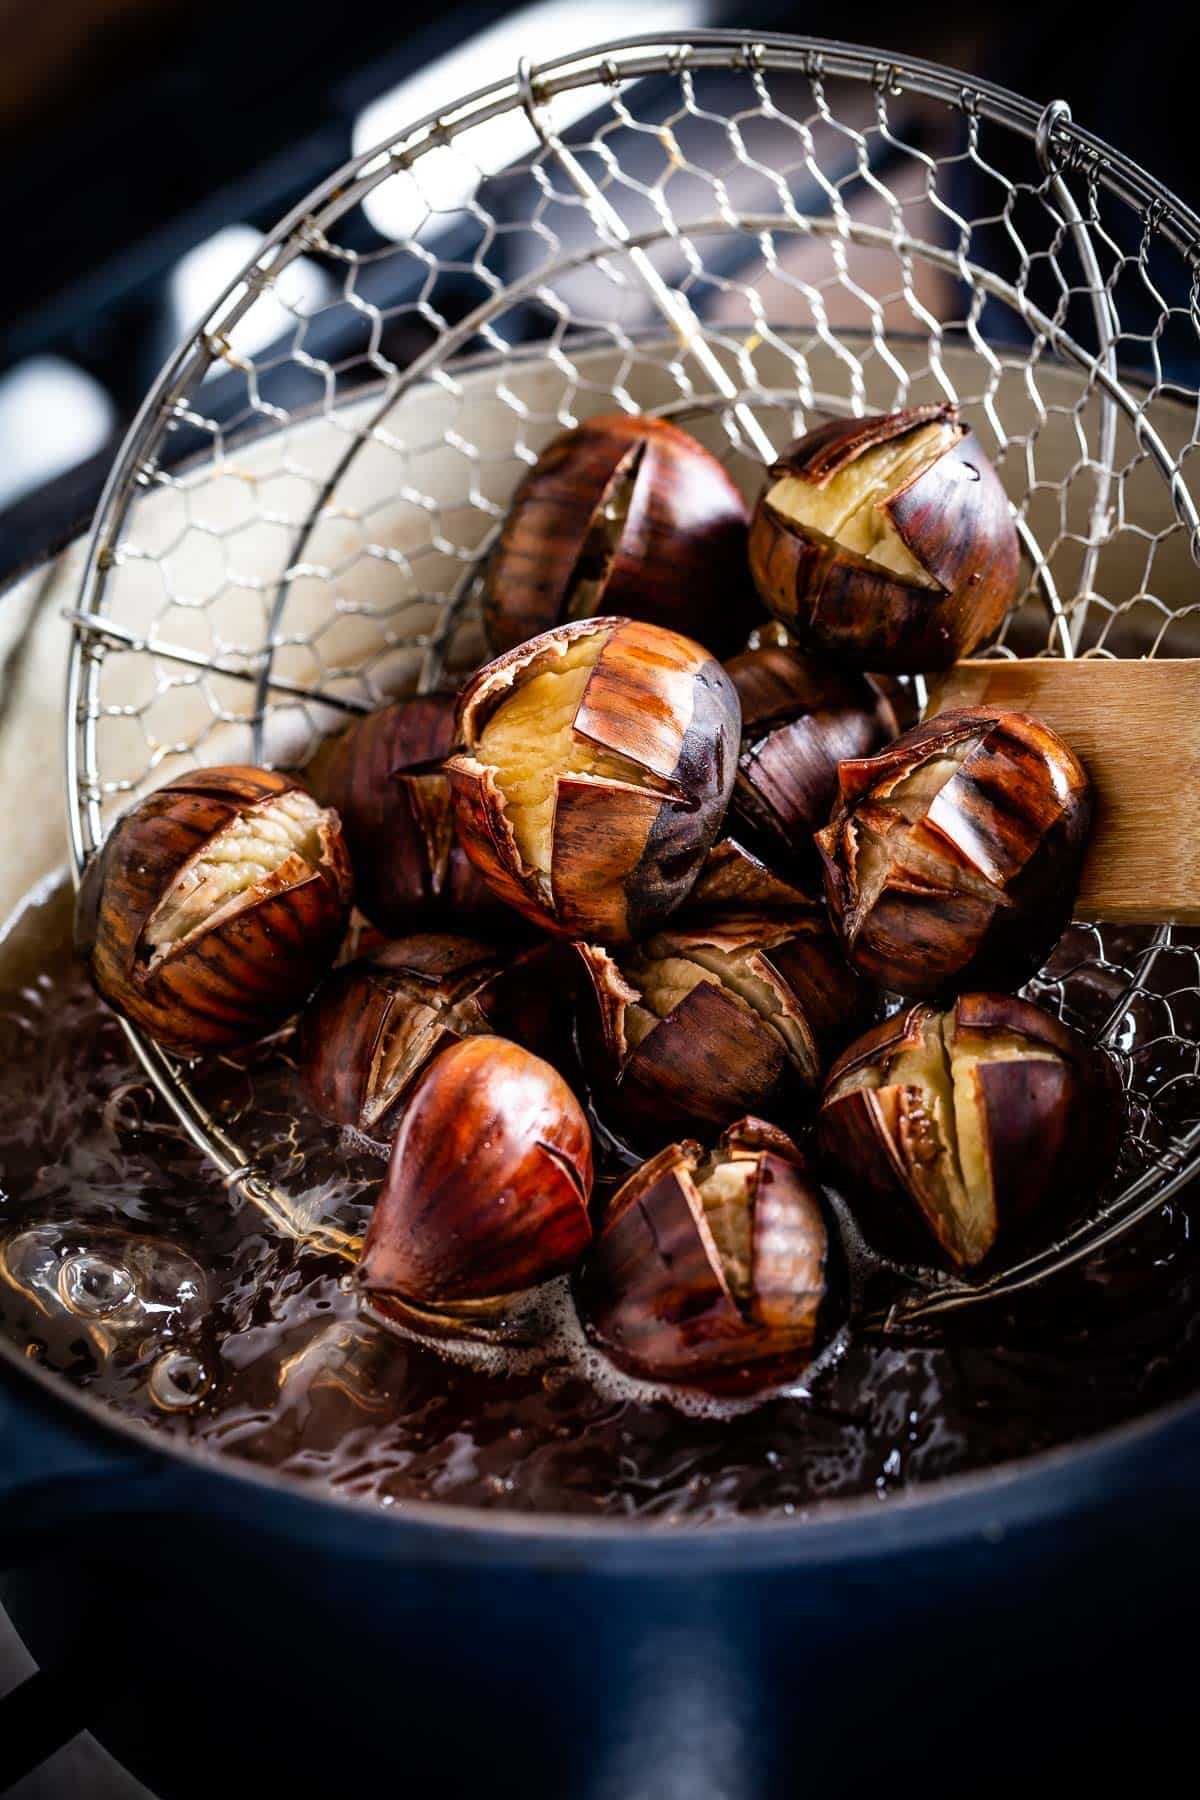 Boiled chestnuts are being scooped out by a person from boiling water.